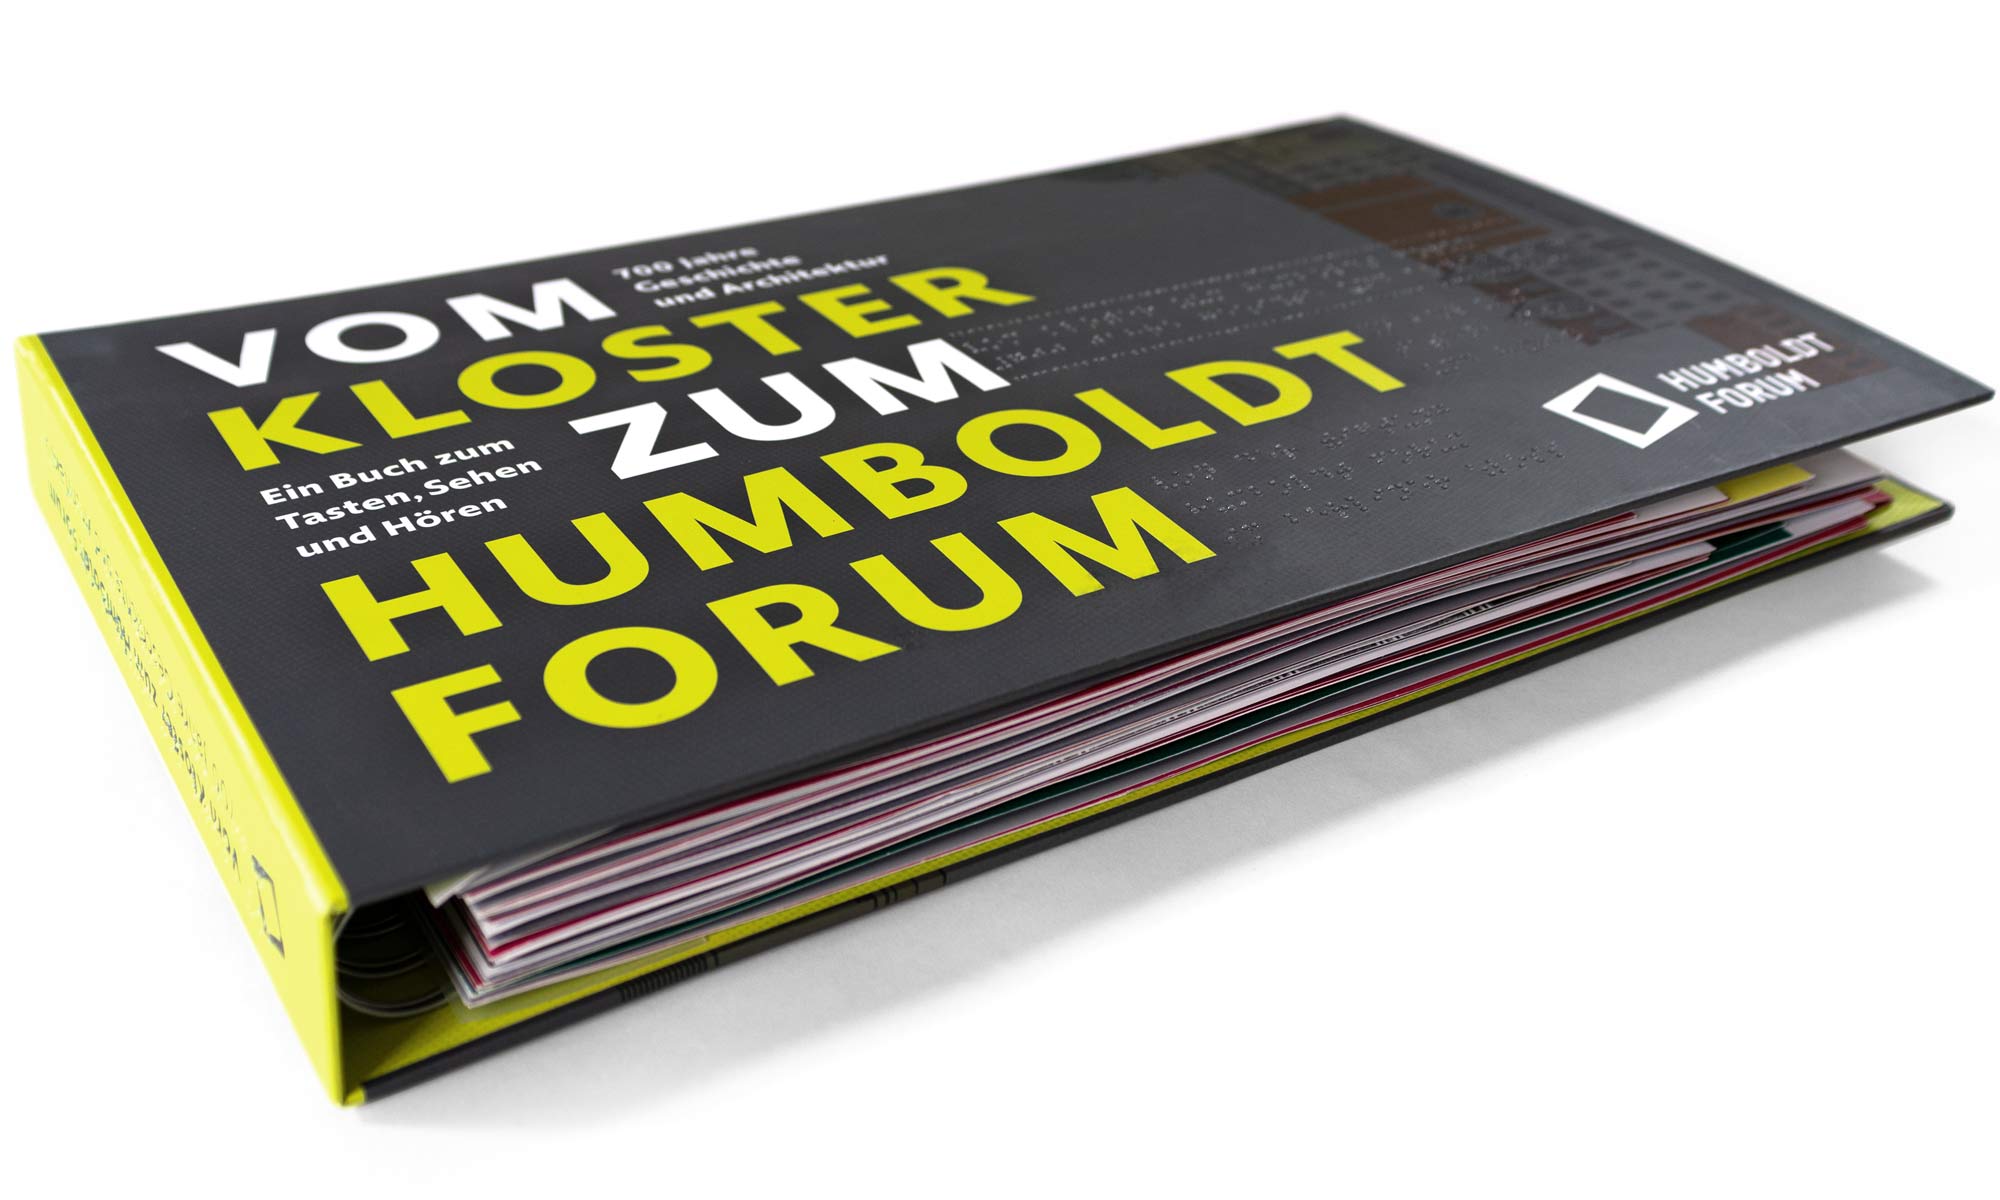 Studio shot of the closed tactile book "Vom Kloster zum Humboldt Forum" on a white background. The focus of the image is on the title of the book written in bold capitals. These were depicted in bright neon yellow and are printed on the cover's dark grey background.